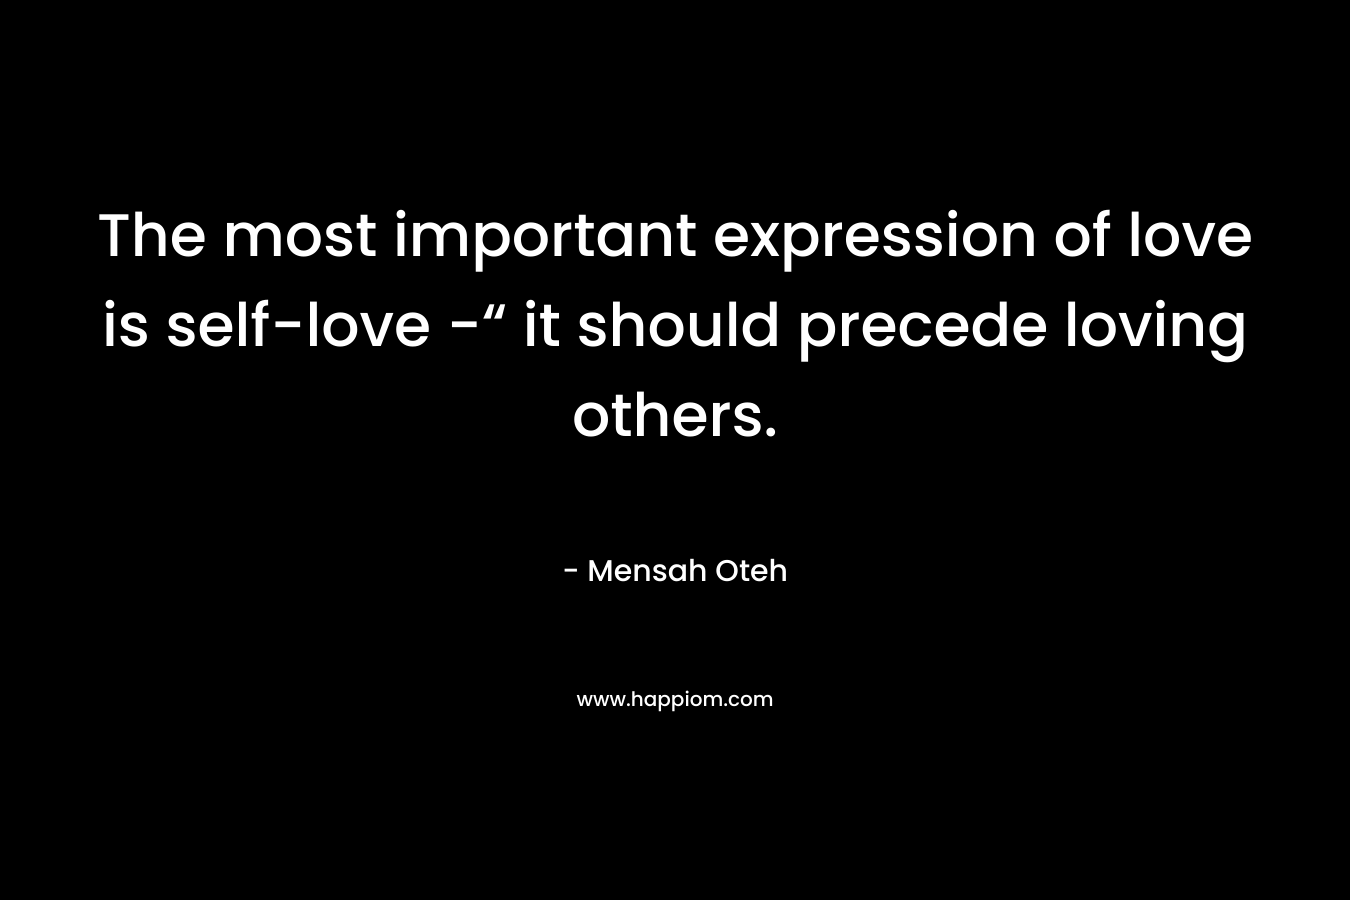 The most important expression of love is self-love -“ it should precede loving others.